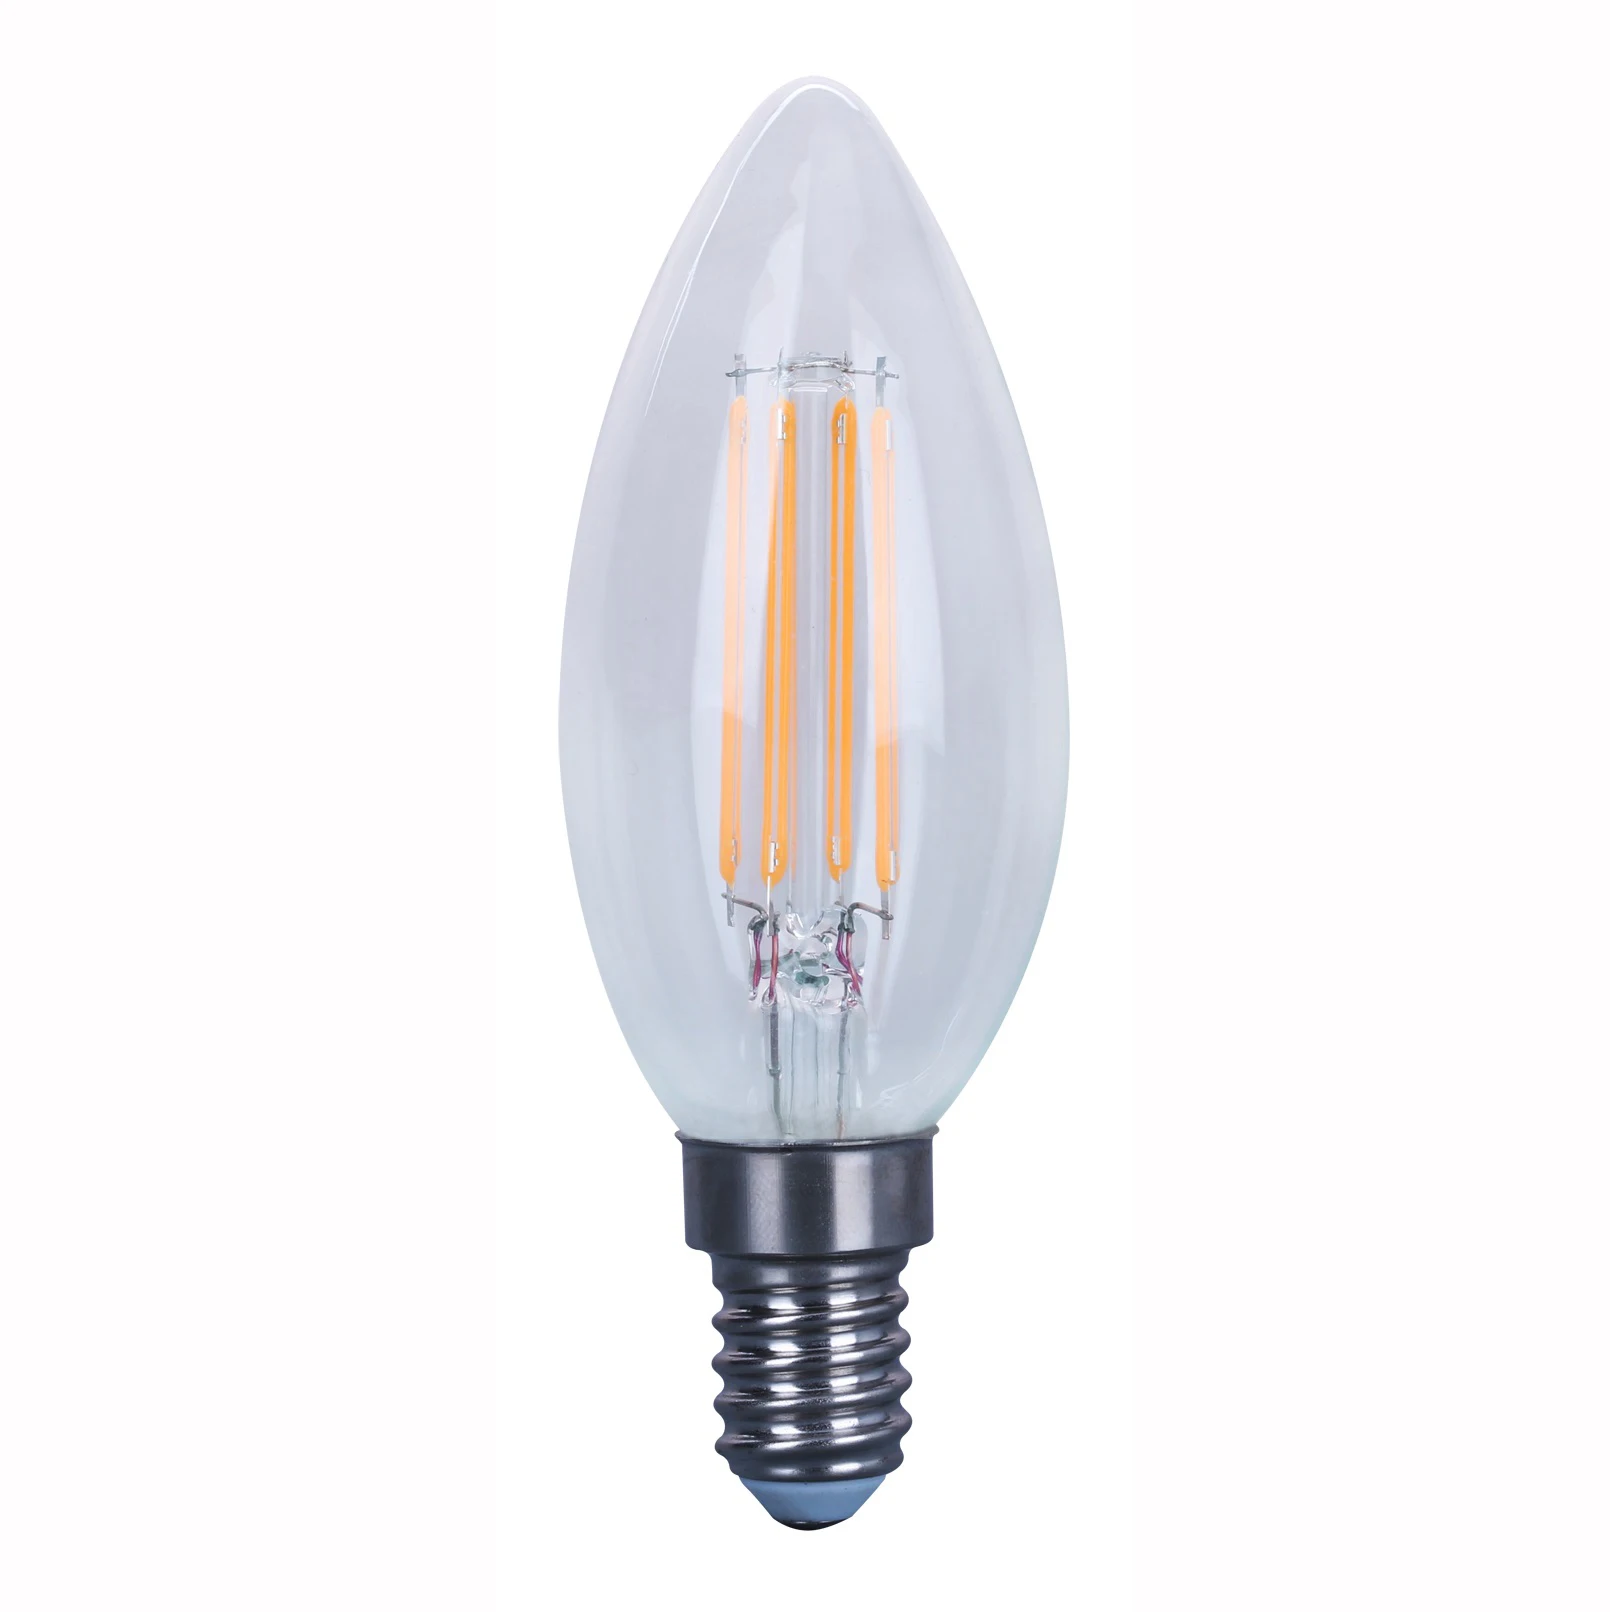 2700K warm white E27 E14 led candle light C35 Led Filament Bulb Dimmable with IC driver